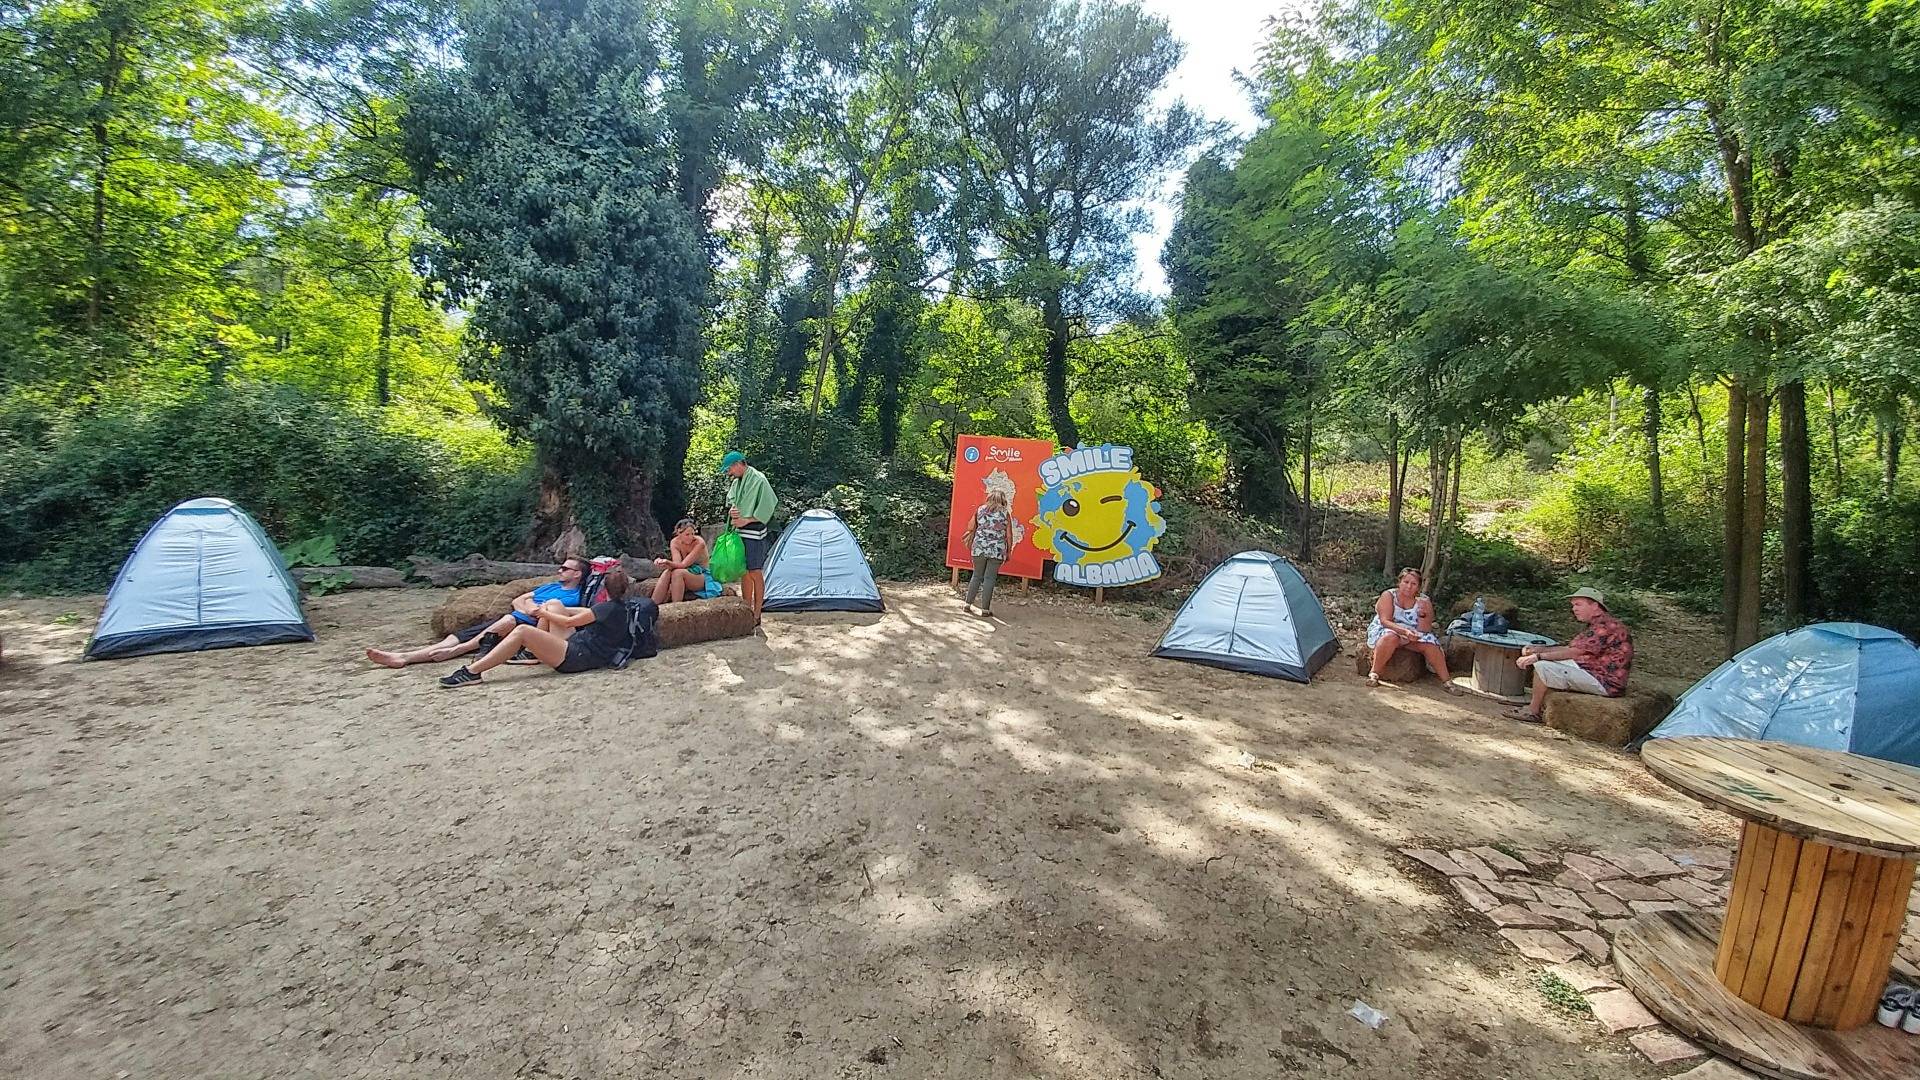 Camping is forbidden, but no one cares